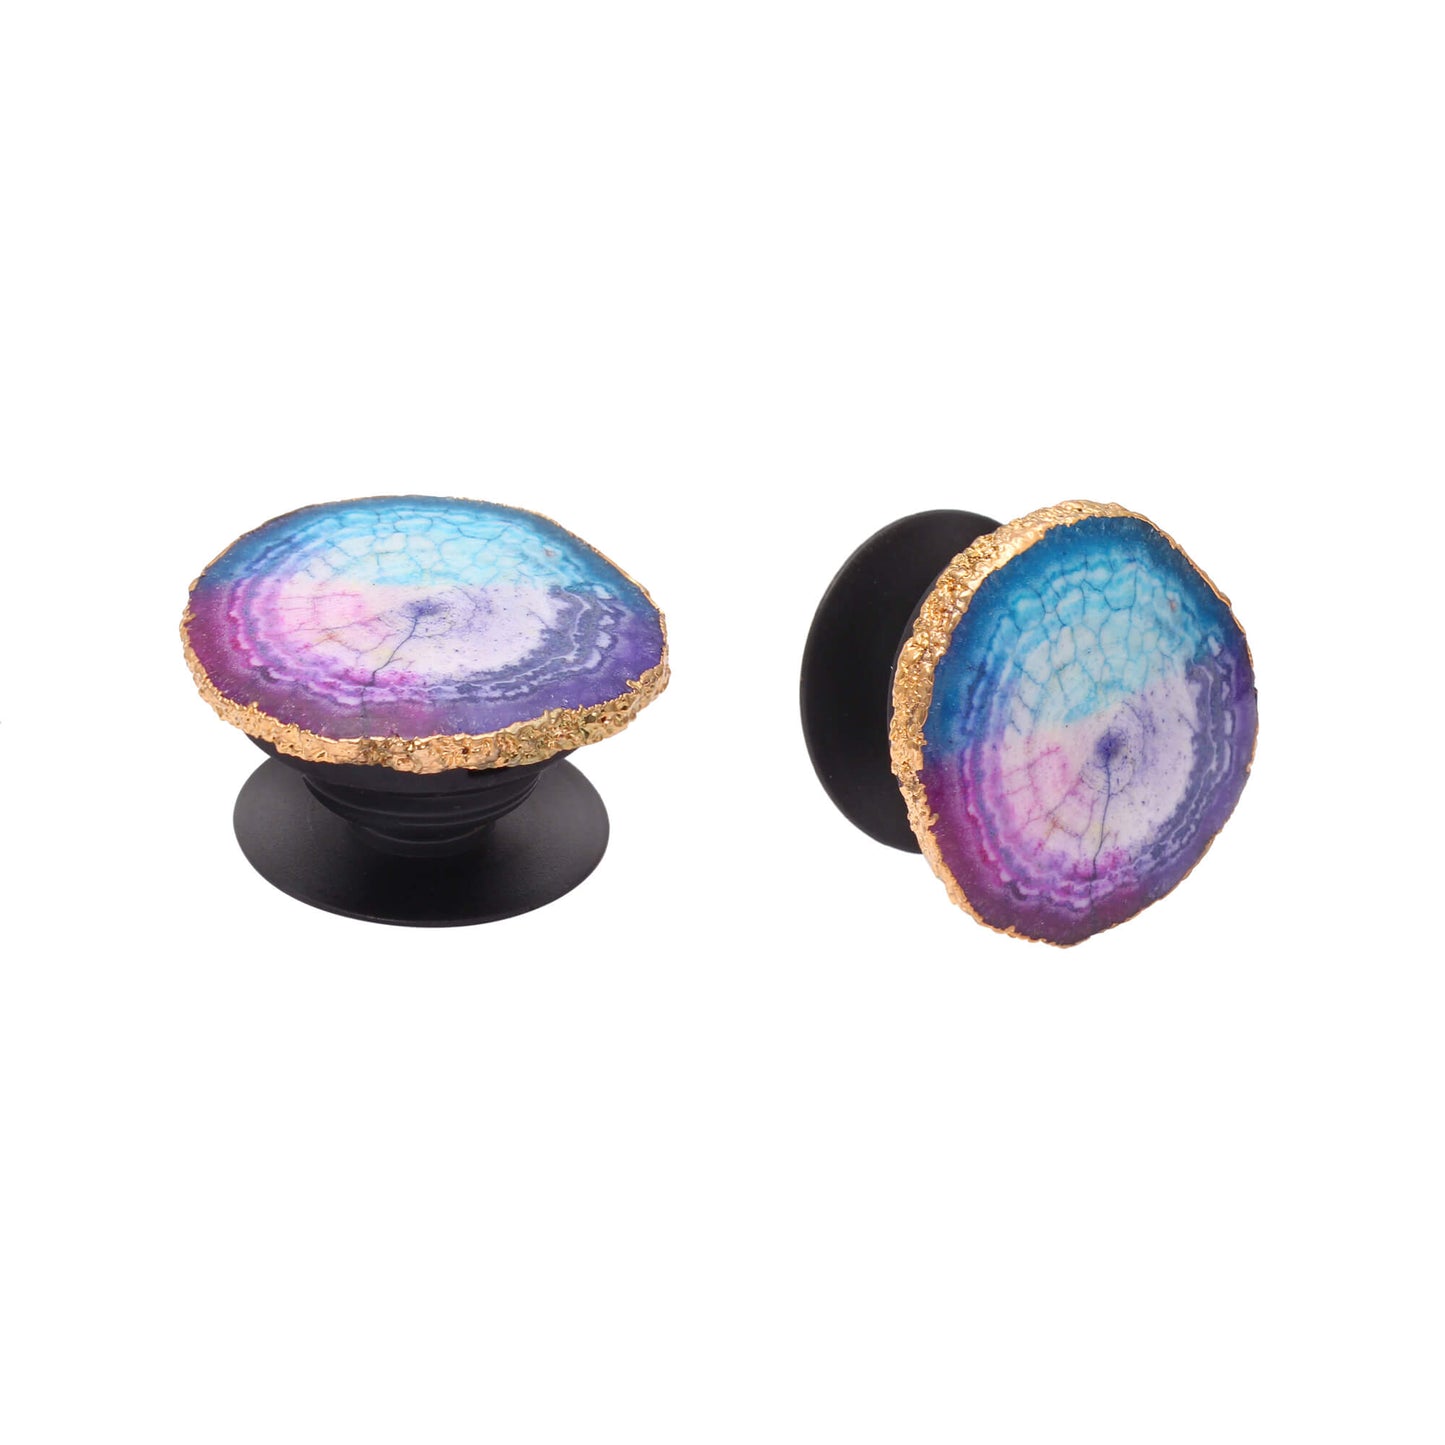 Rainbow Druzy Pop Socket Mobile Holder with Gold Plated Edges - Unique and Stylish Phone Grip